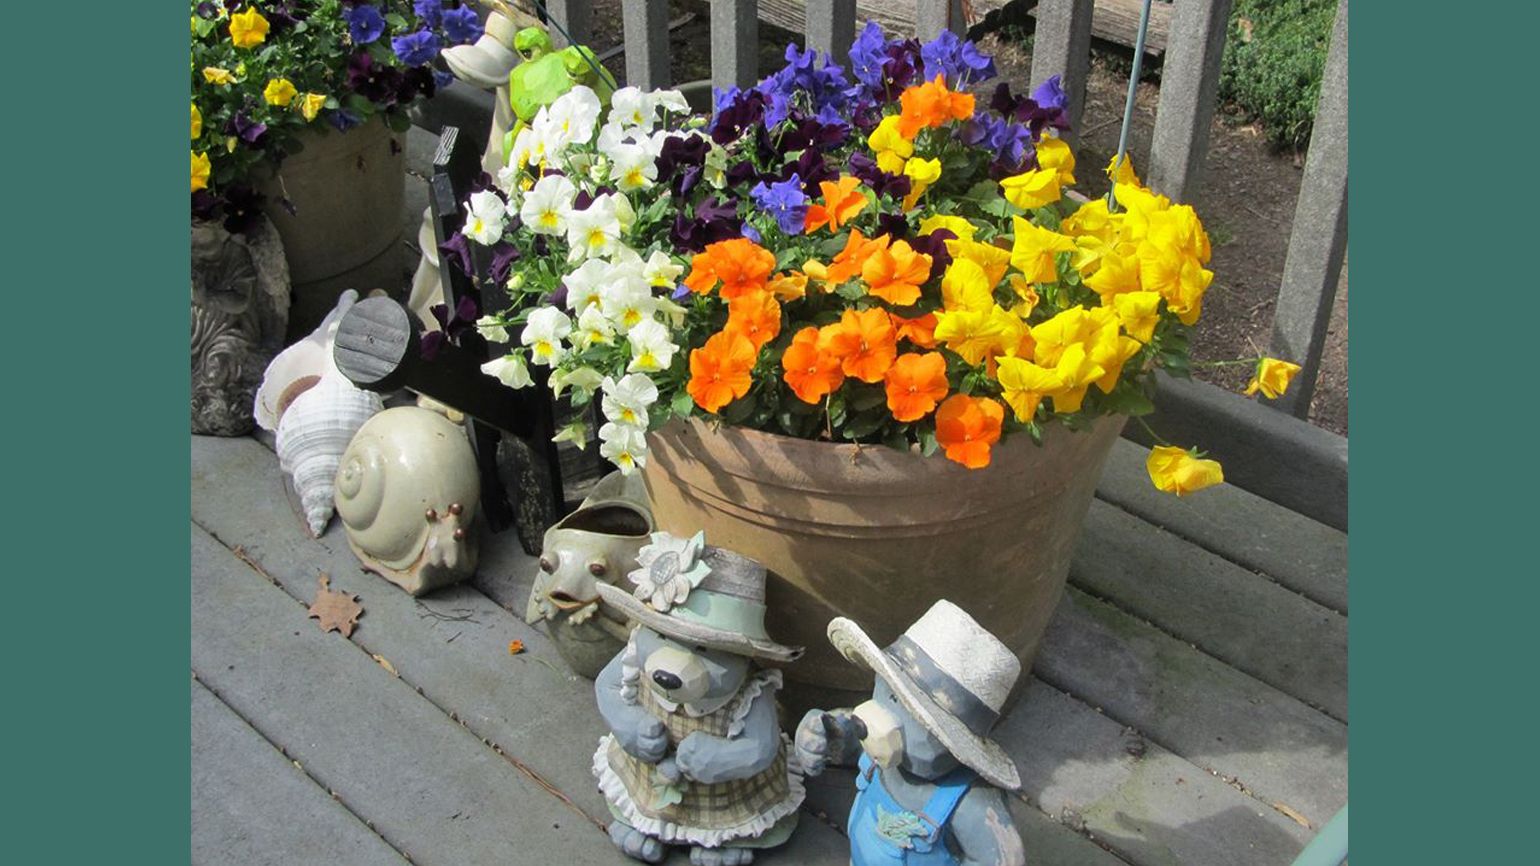 Some pansies on a deck.